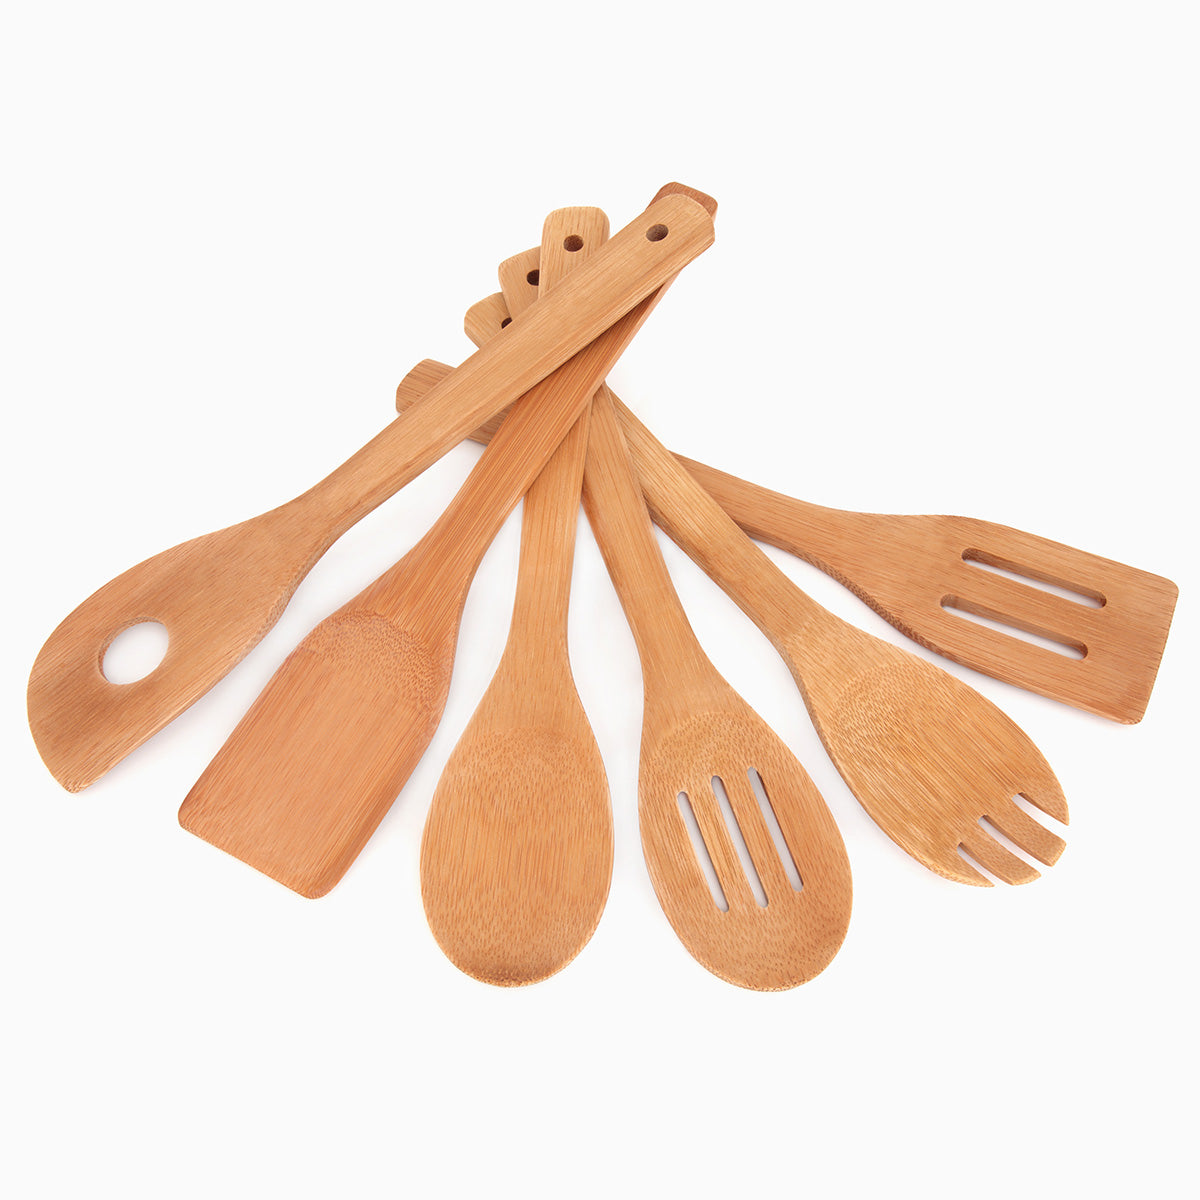 Wooden Kitchen Utensil Set of 6 | Bamboo Cooking Tools-0